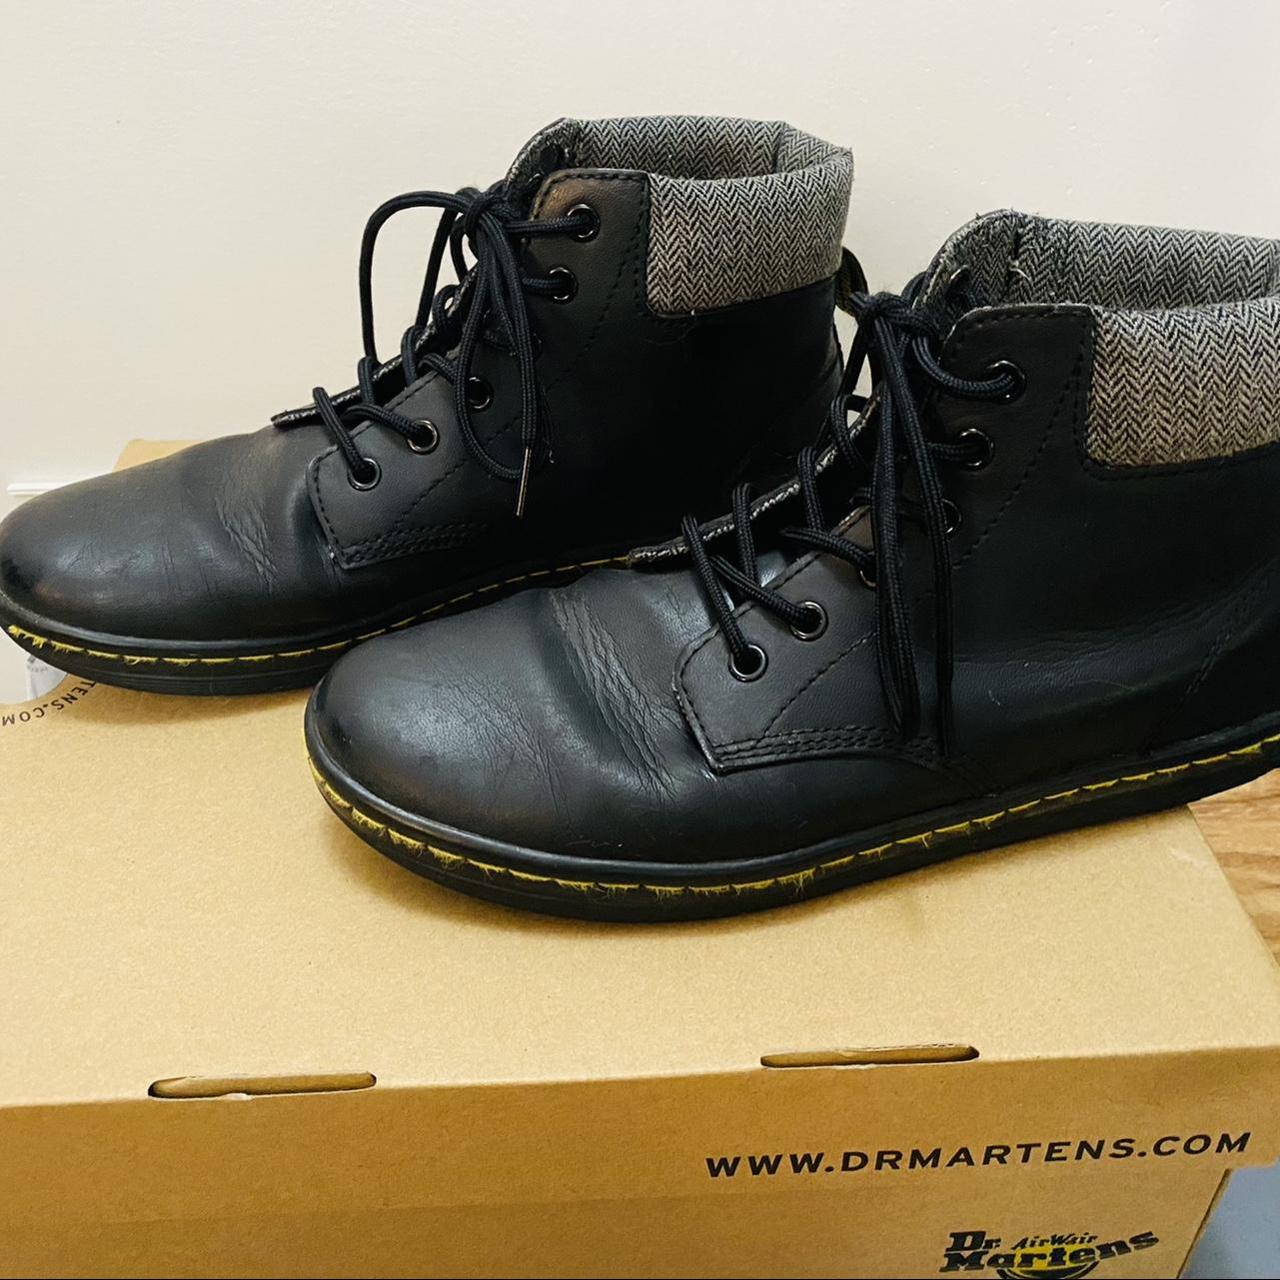 Dr. Martens Women's Black and Grey Boots (2)